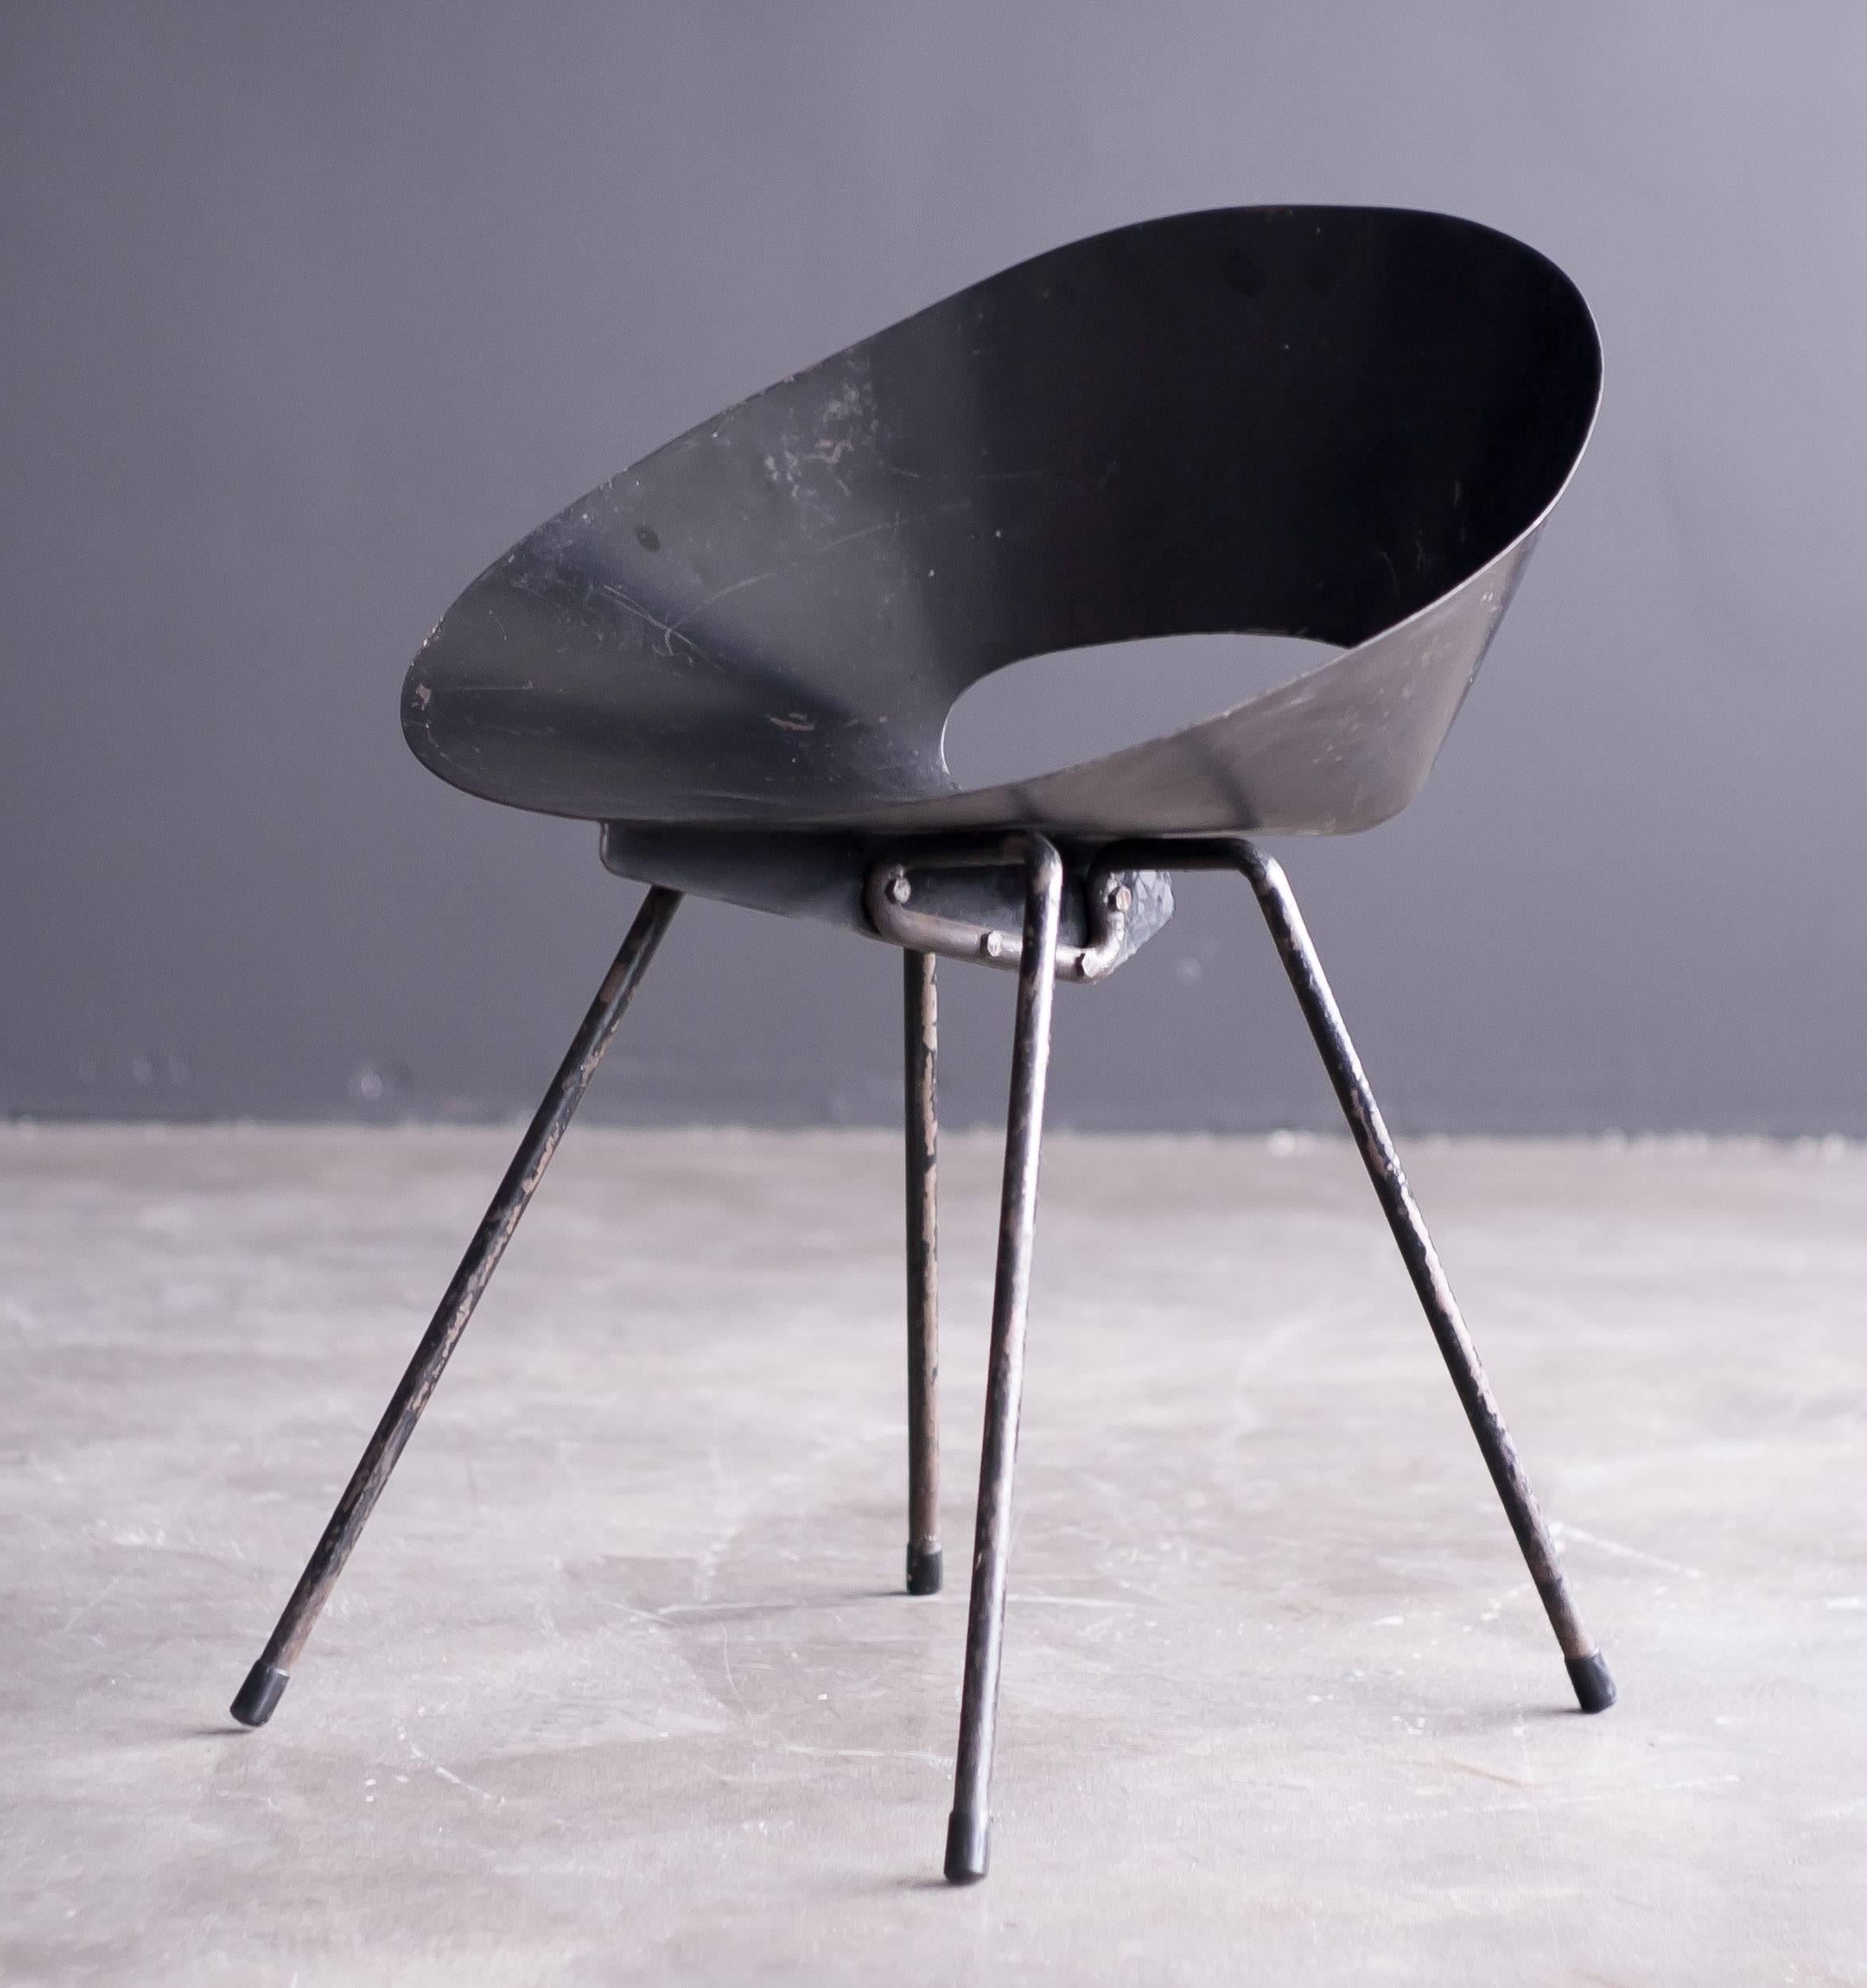 donald knorr chair